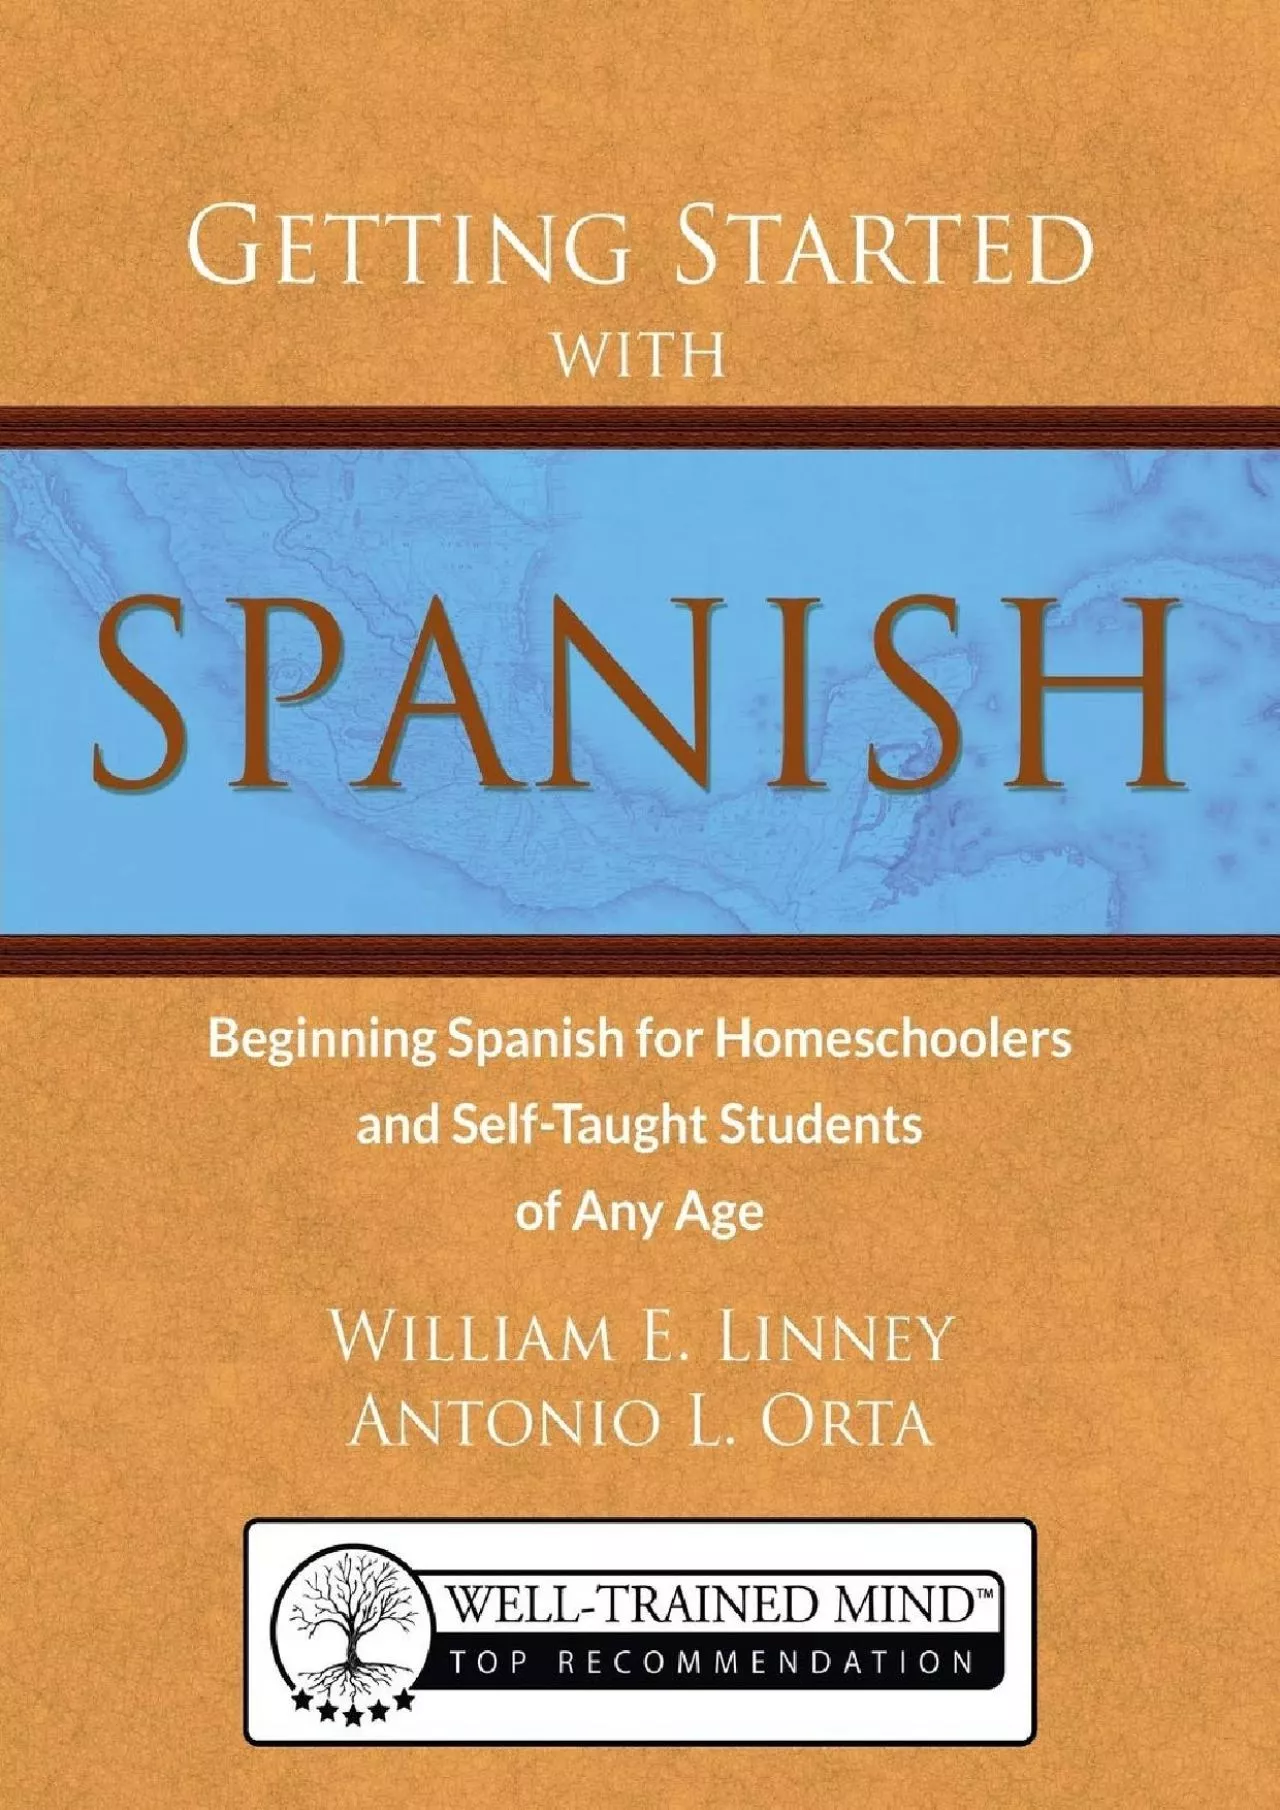 [EBOOK] Getting Started with Spanish: Beginning Spanish for Homeschoolers and Self-Taught